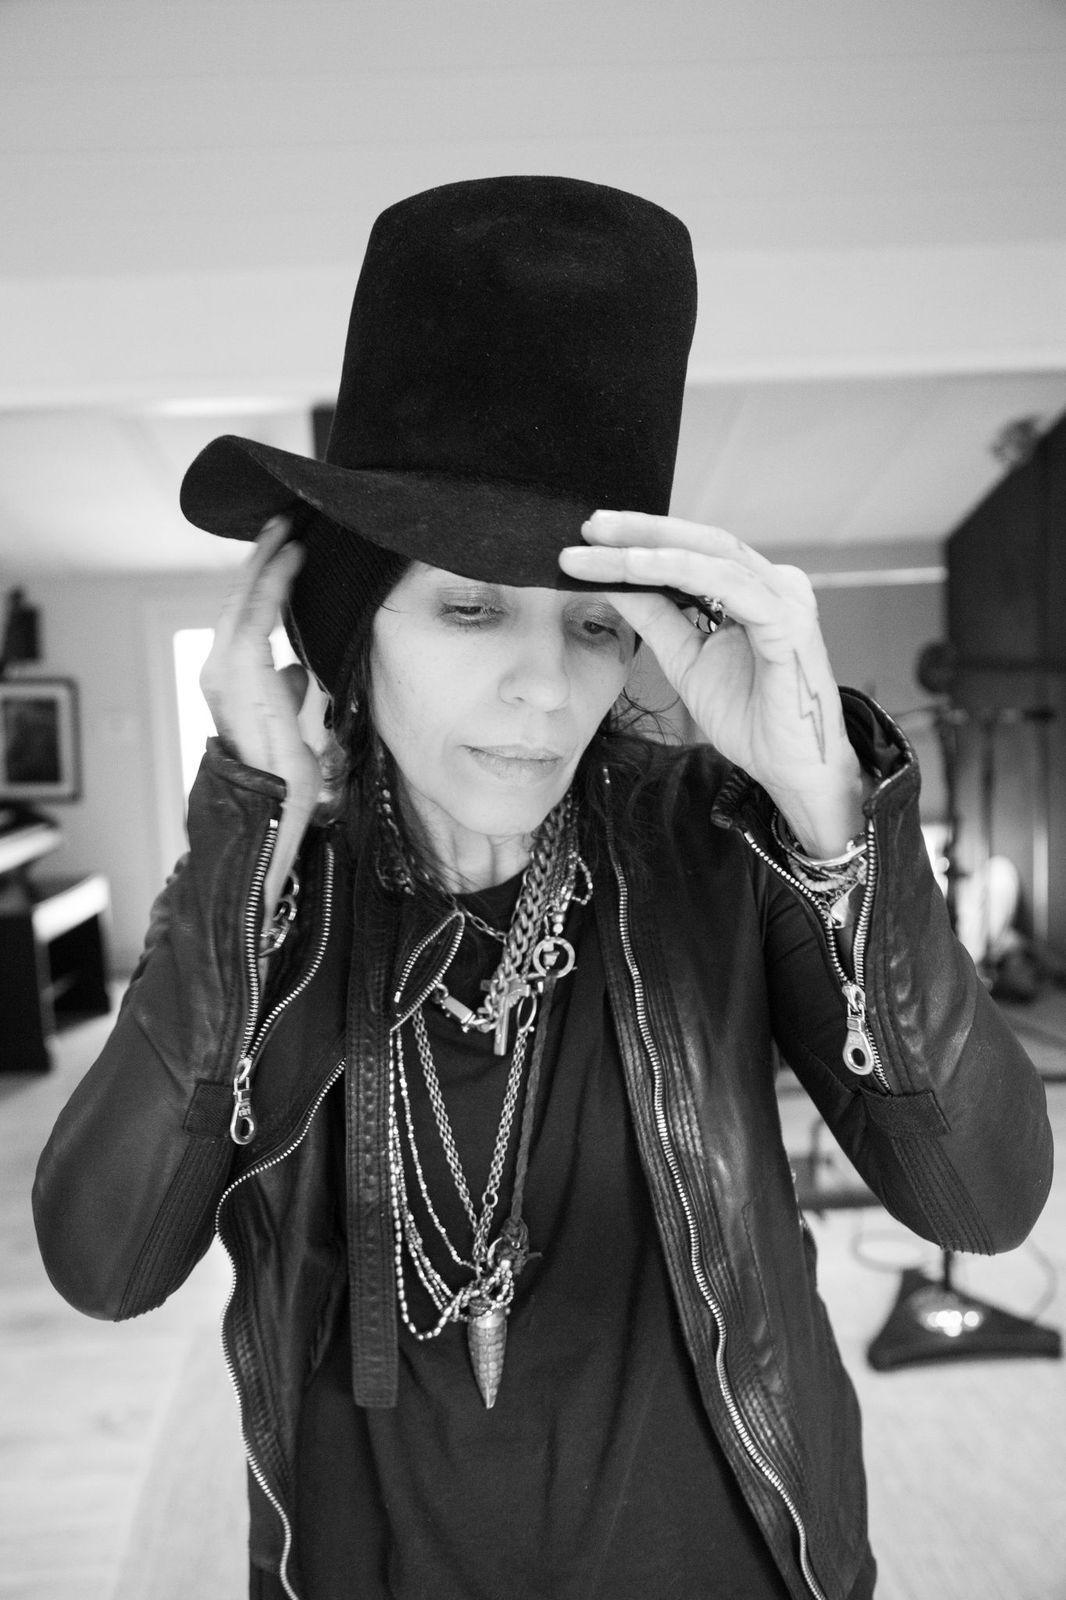 Linda Perry on Producing, Embracing Change, and Living Your Truth